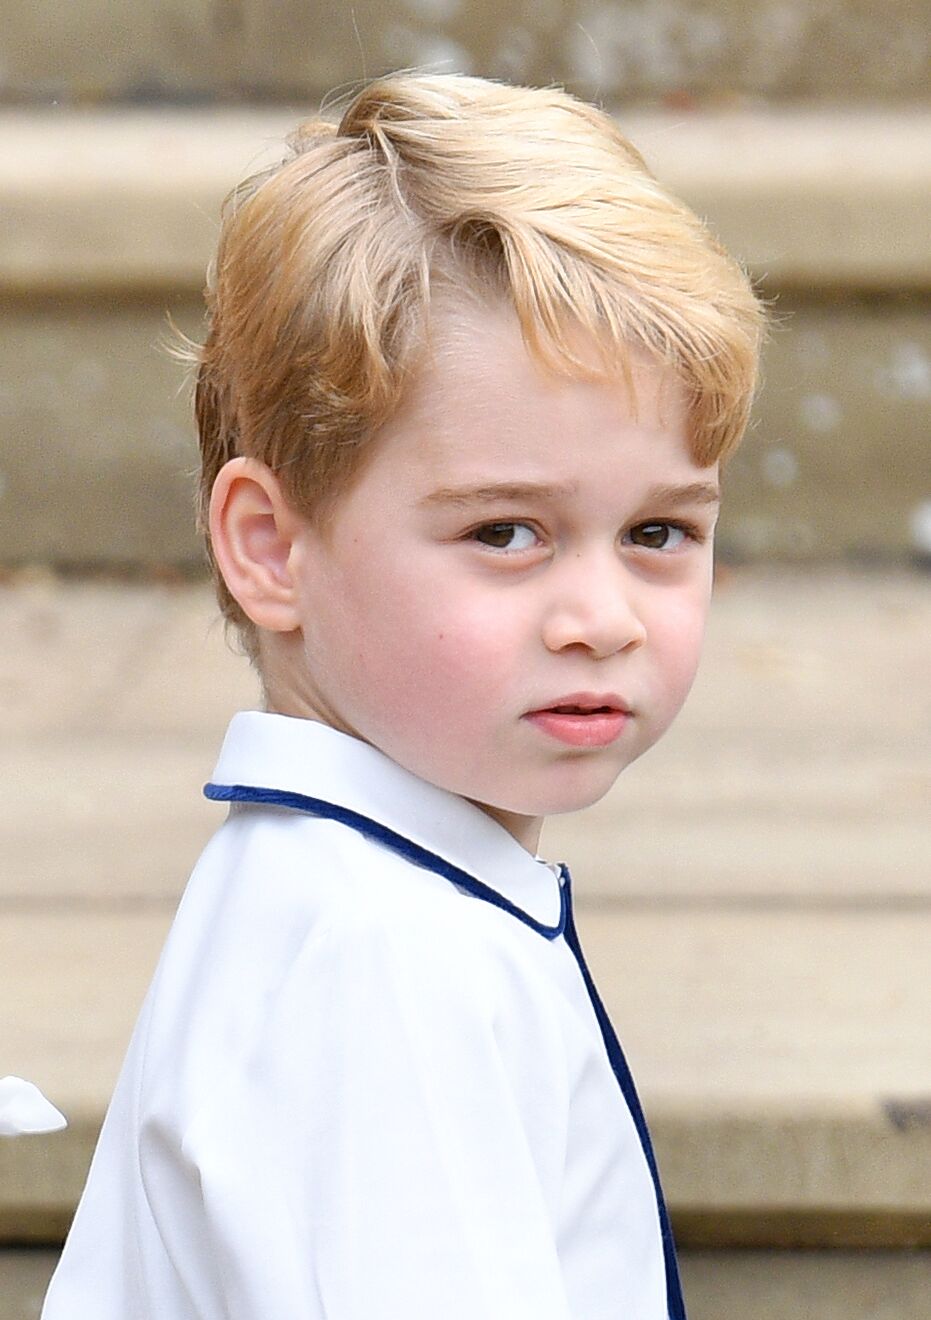 Prince George of Cambridge attends the wedding of Princess Eugenie of York and Jack Brooksbank at St George's Chapel in Windsor, England | Photo: Getty Images